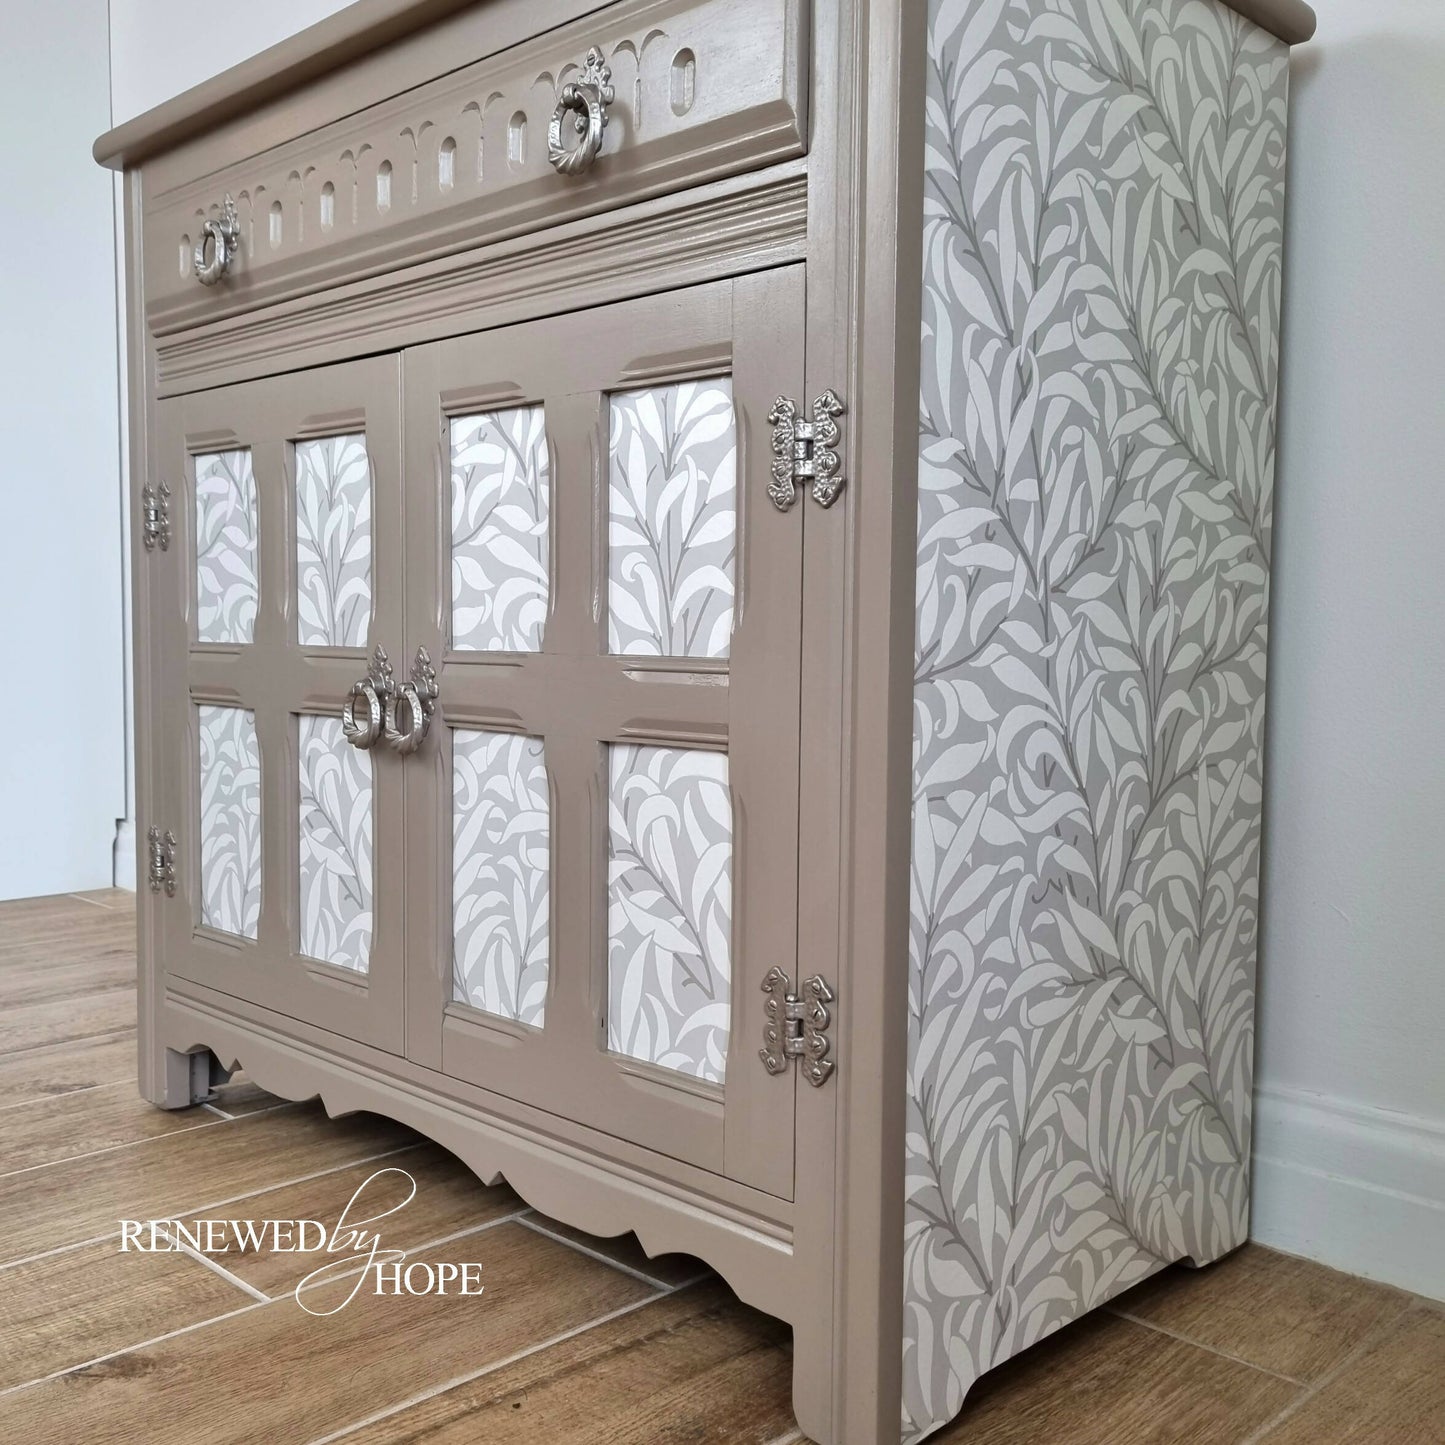 SOLD - Neutral Sideboard, Old Charm Solid Oak Sideboard, Vintage Sideboard, William Morris Willow Bough, Small Hallway Storage Cupboard, Taupe